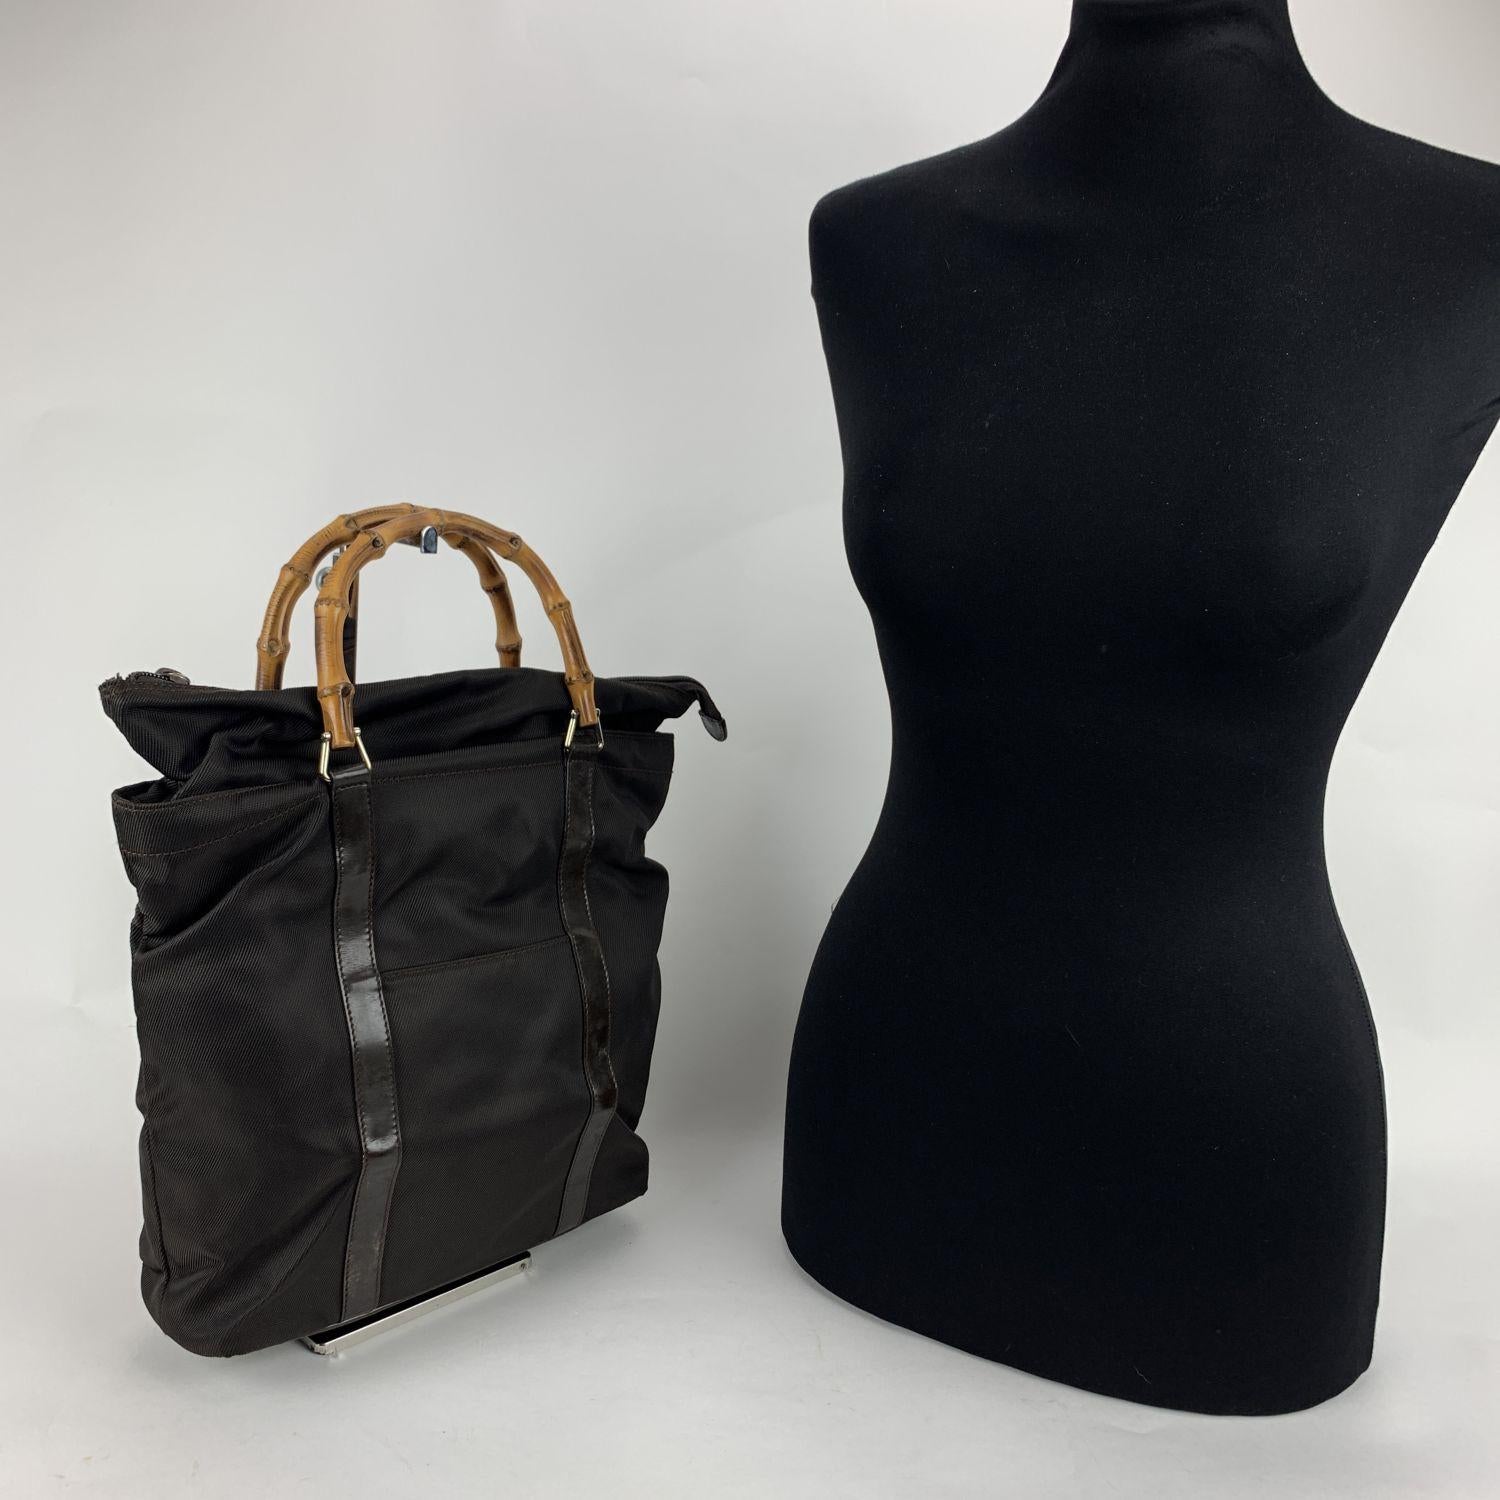 Vintage bamboo small tote by Gucci, crafted in brown canvas with patent leather trim. It features Bamboo handles, 1 front pocket, upper zipper closure, diamond lining and 1 side zip pocket inside. 'GUCCI - Made in Italy' tag (with serial number on